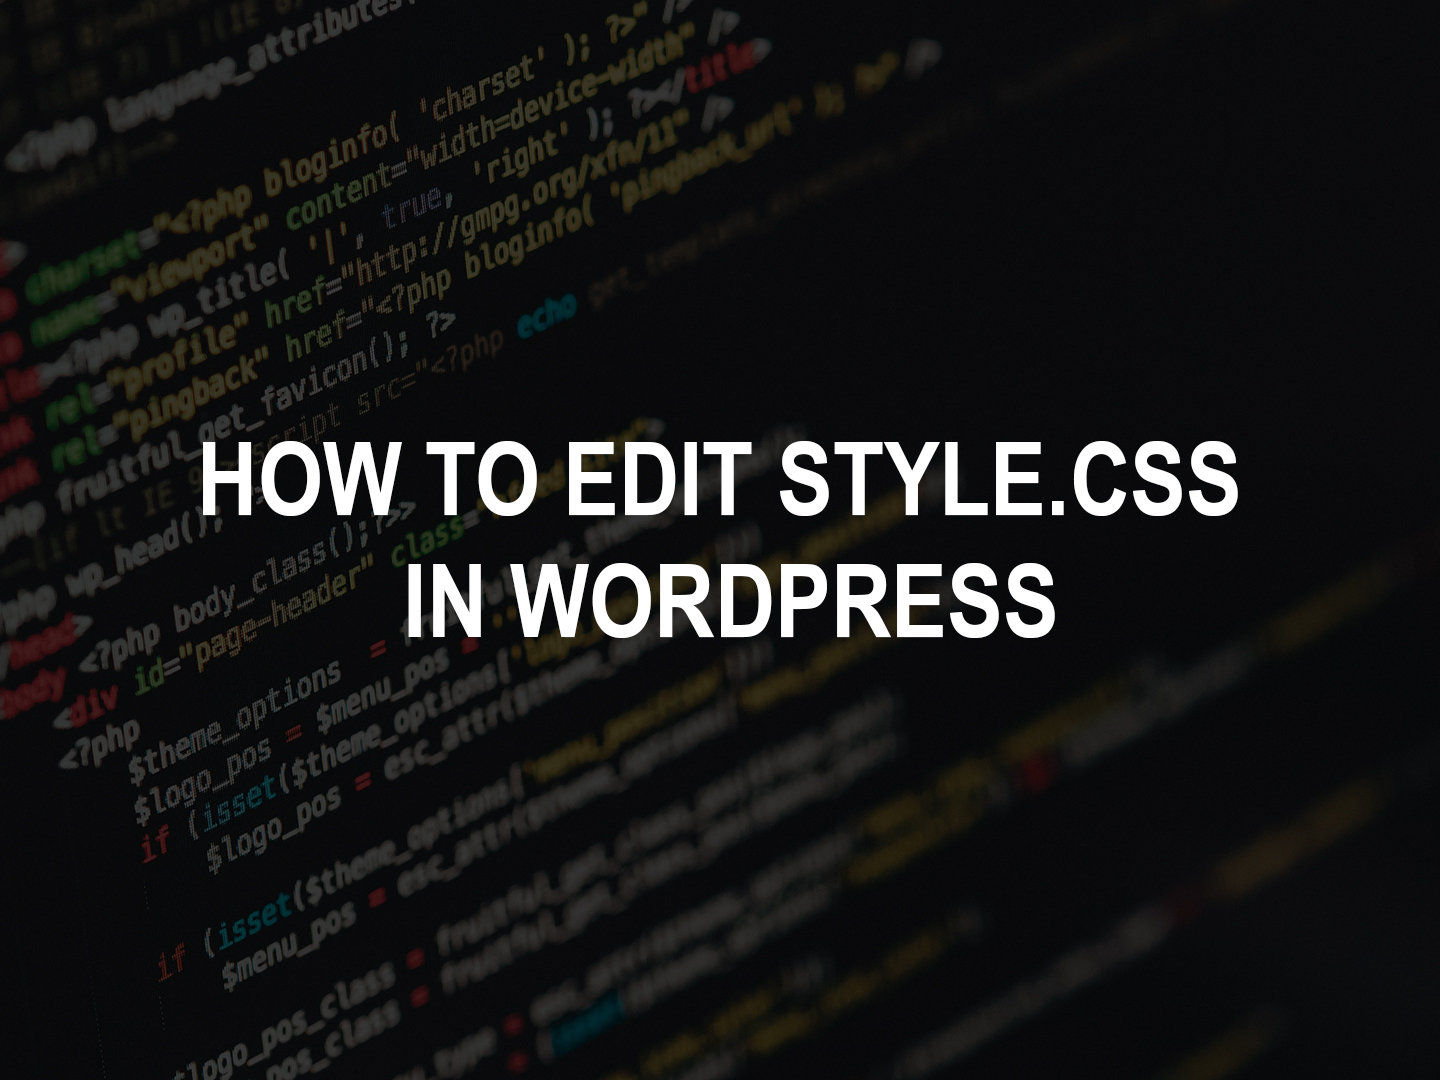 How To Edit Style.css In WordPress